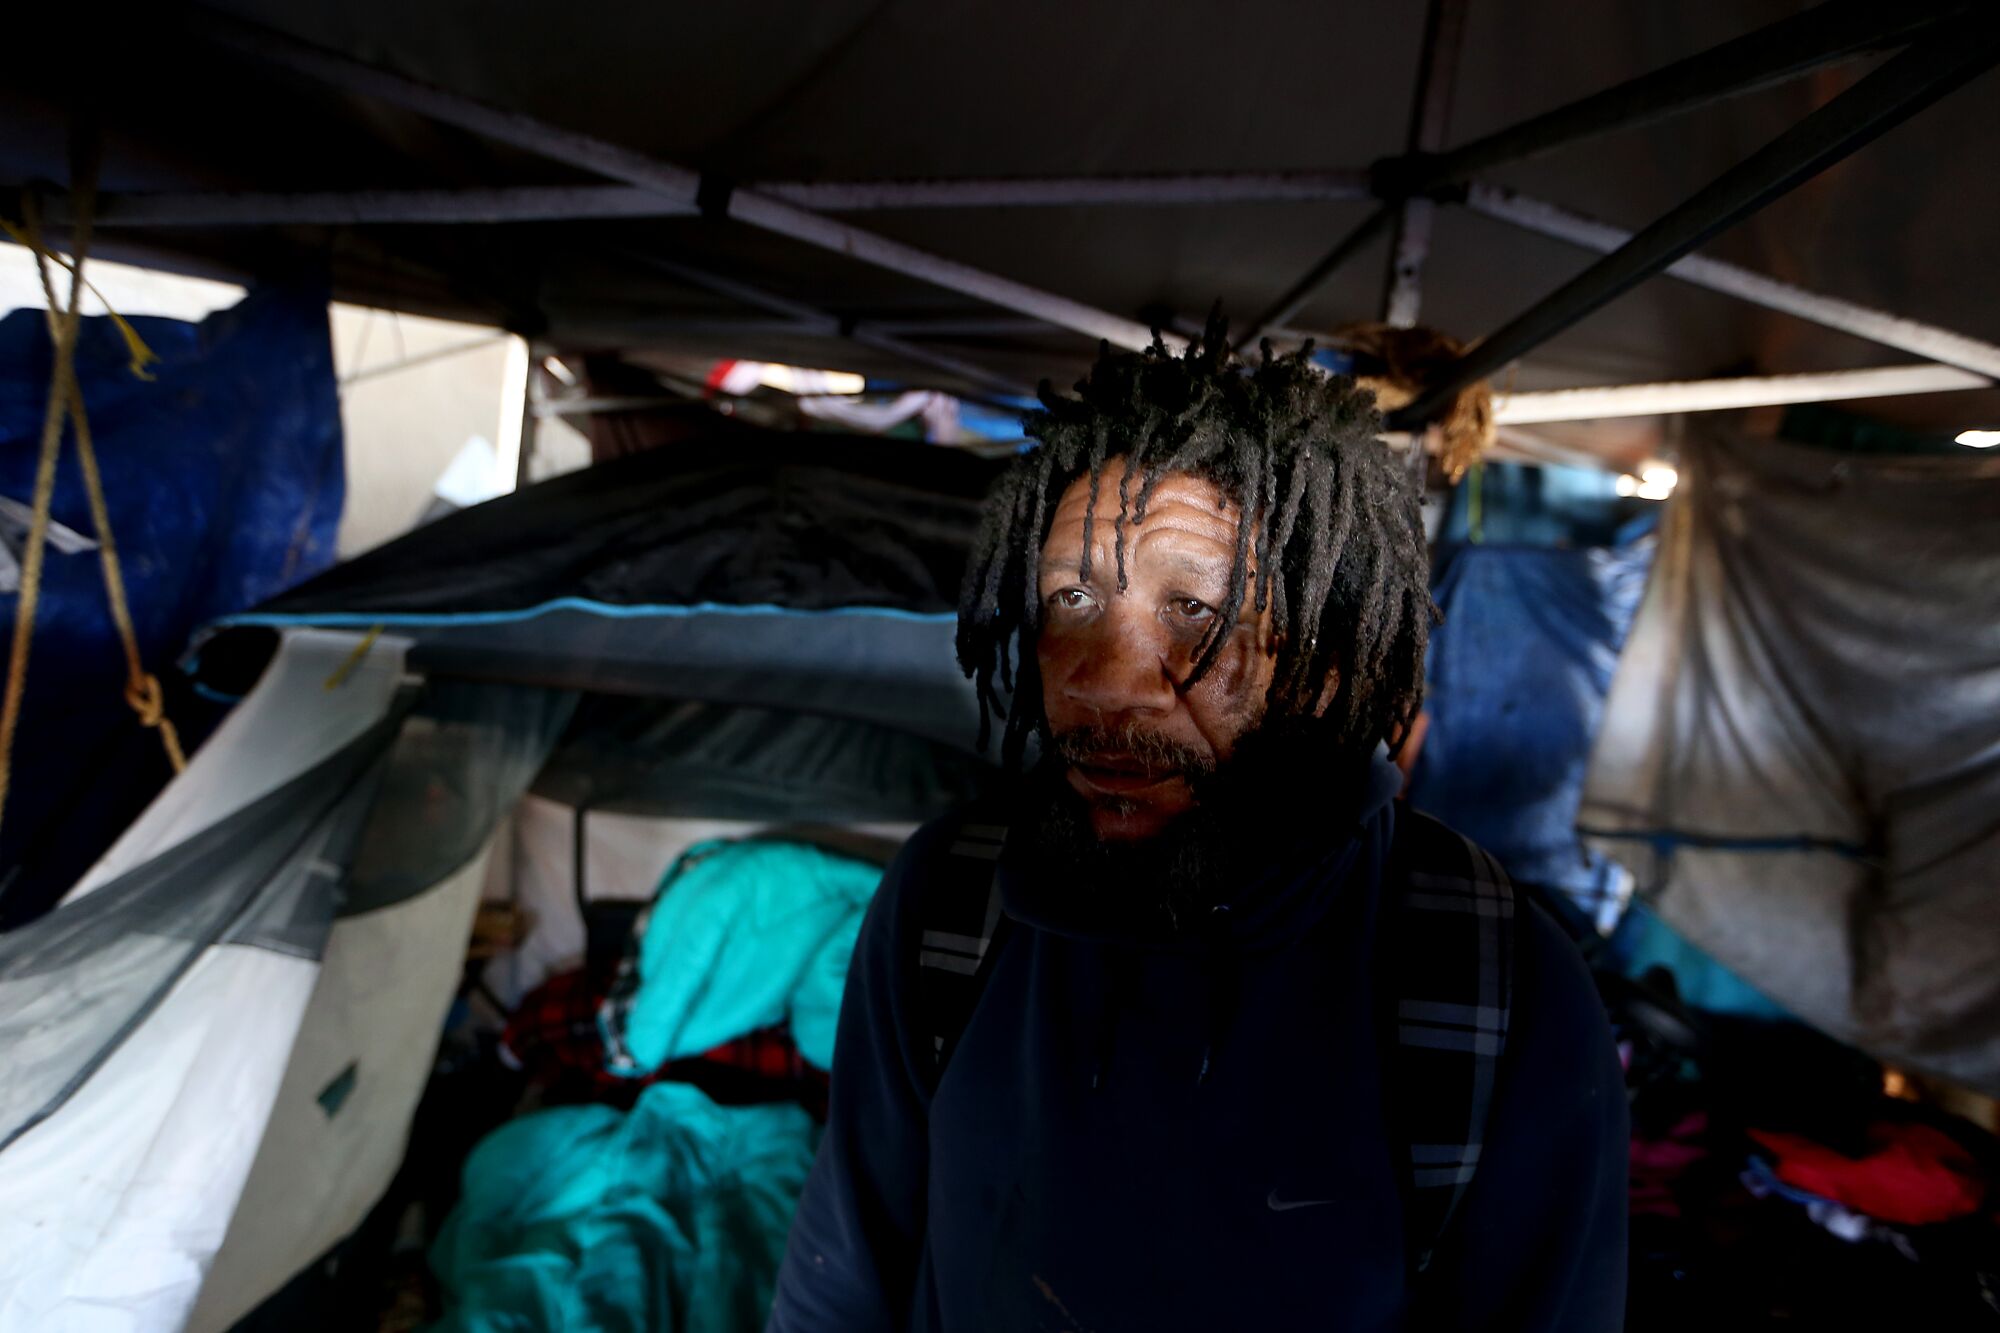 An unhoused man named Roscoe lives in a tent under the 405 Freeway bridge 